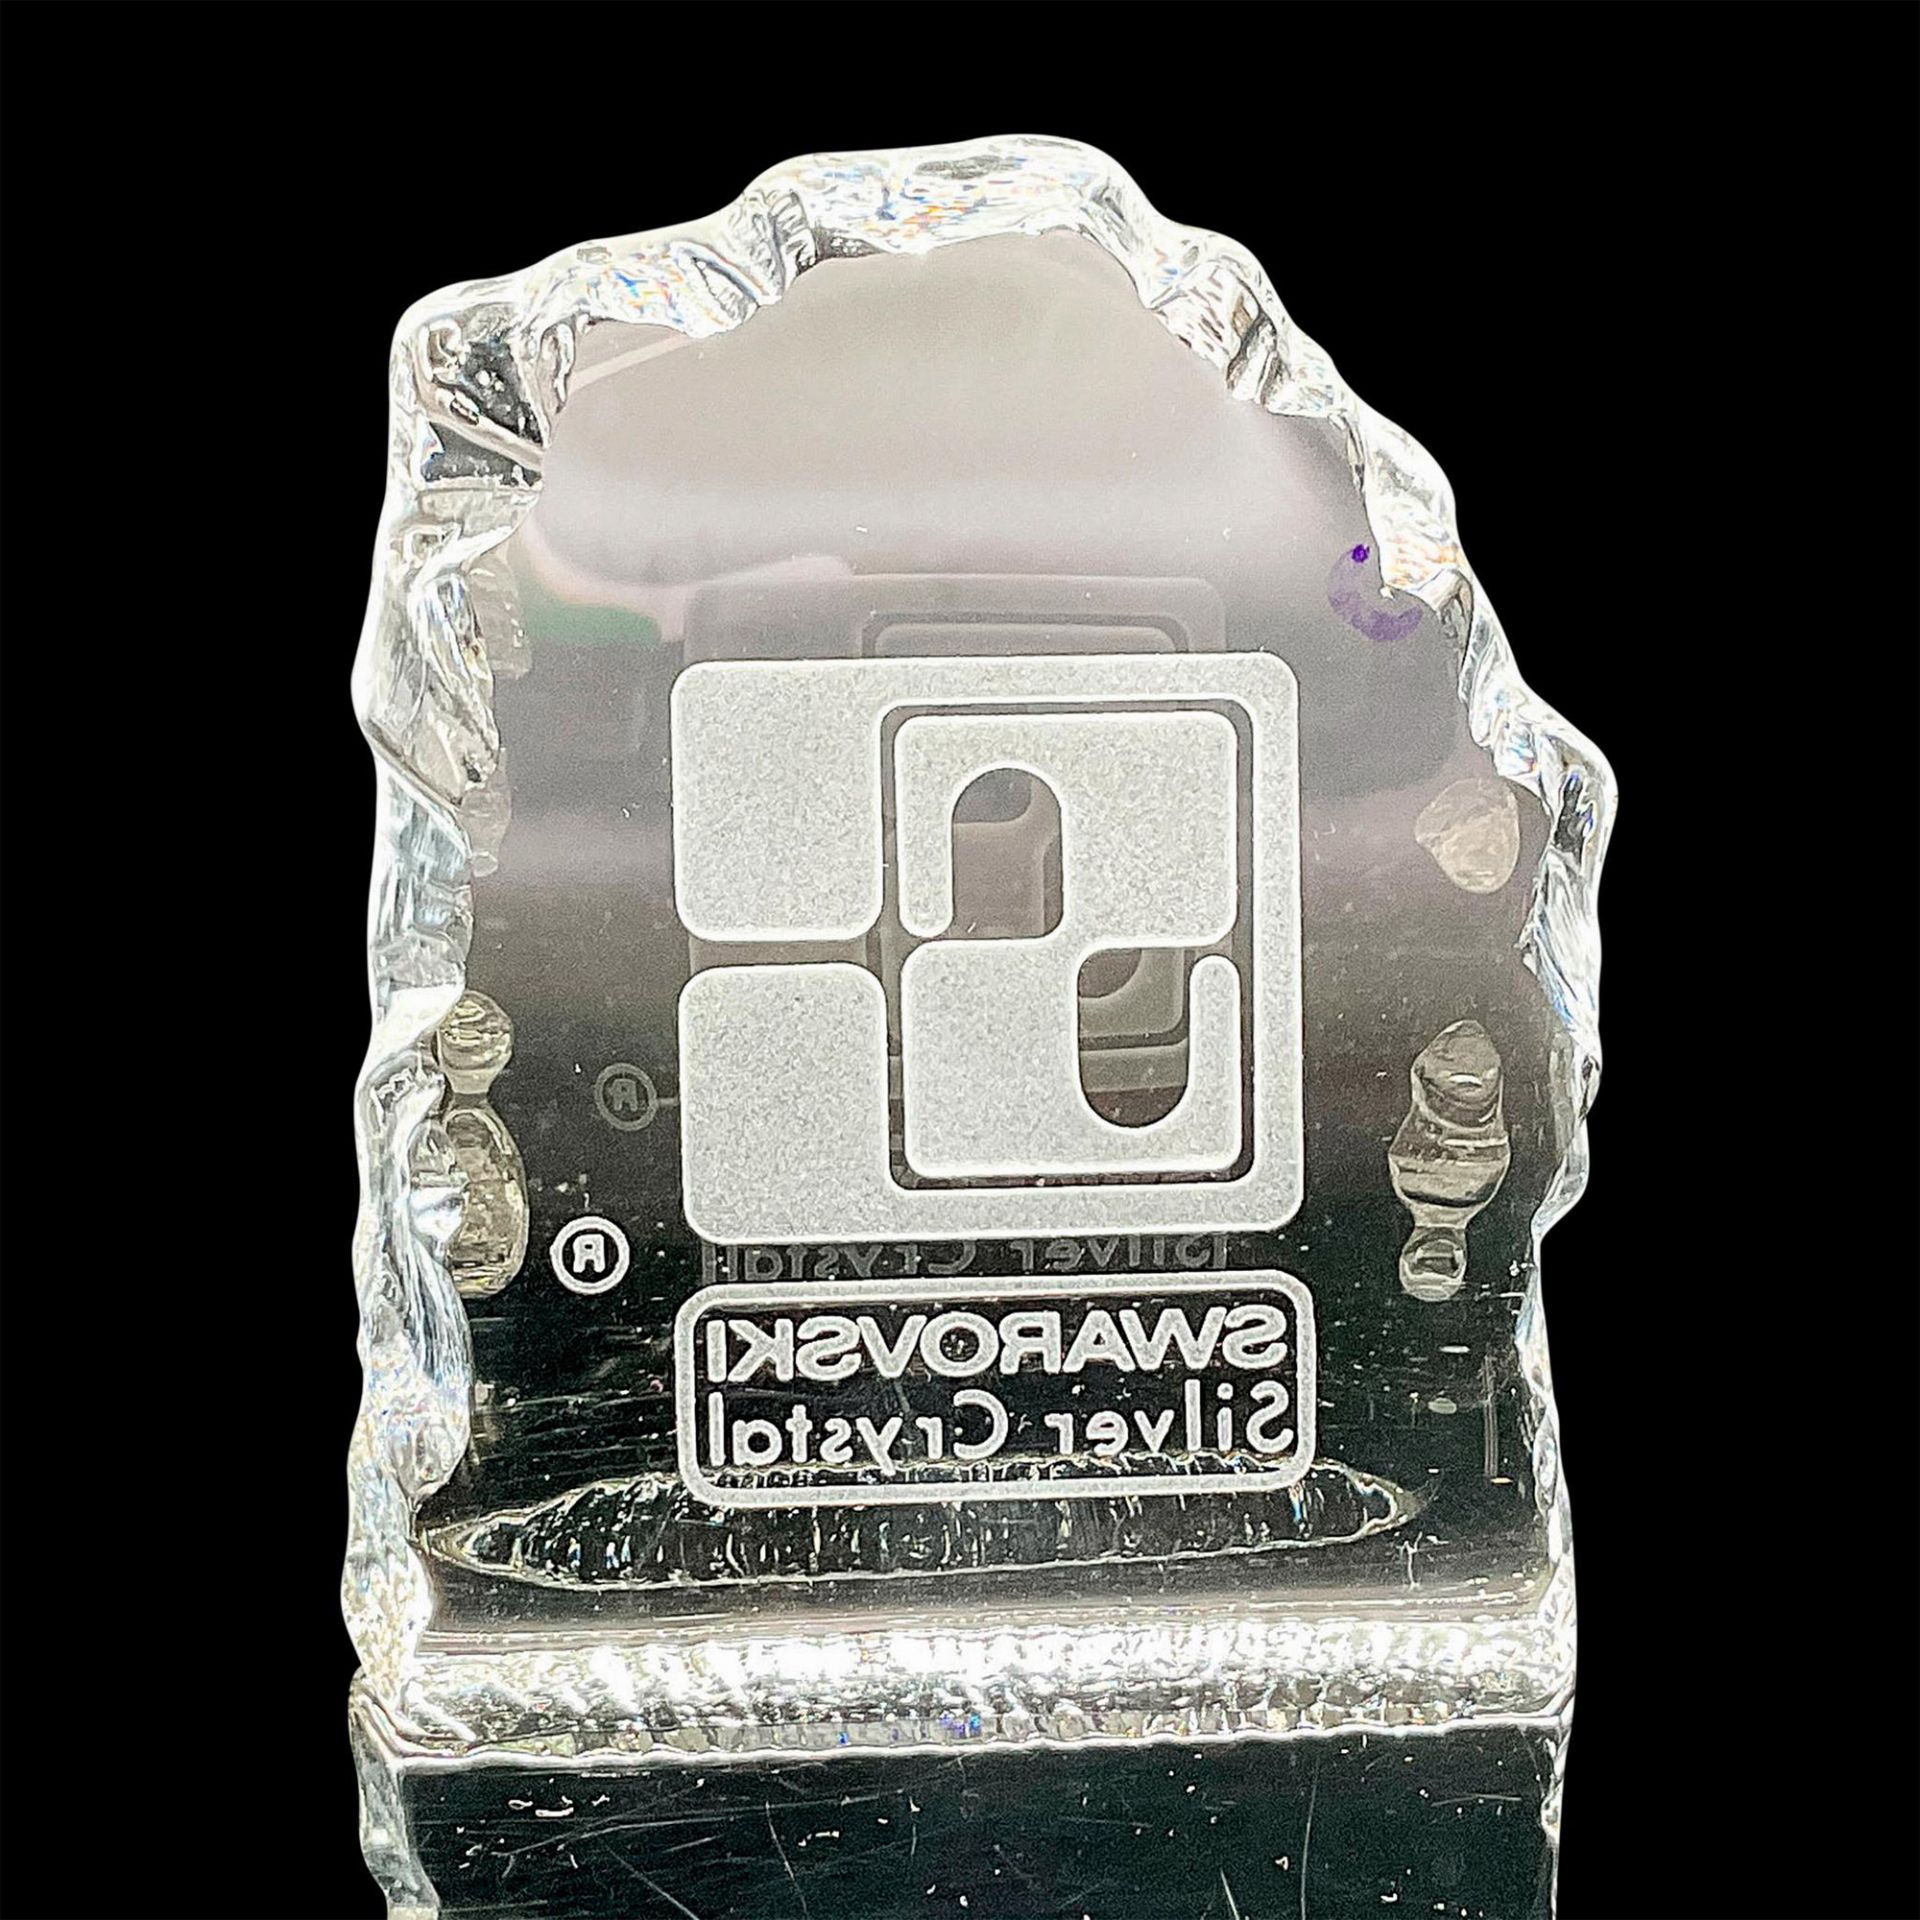 Swarovski Silver Crystal Paperweight - Image 2 of 3